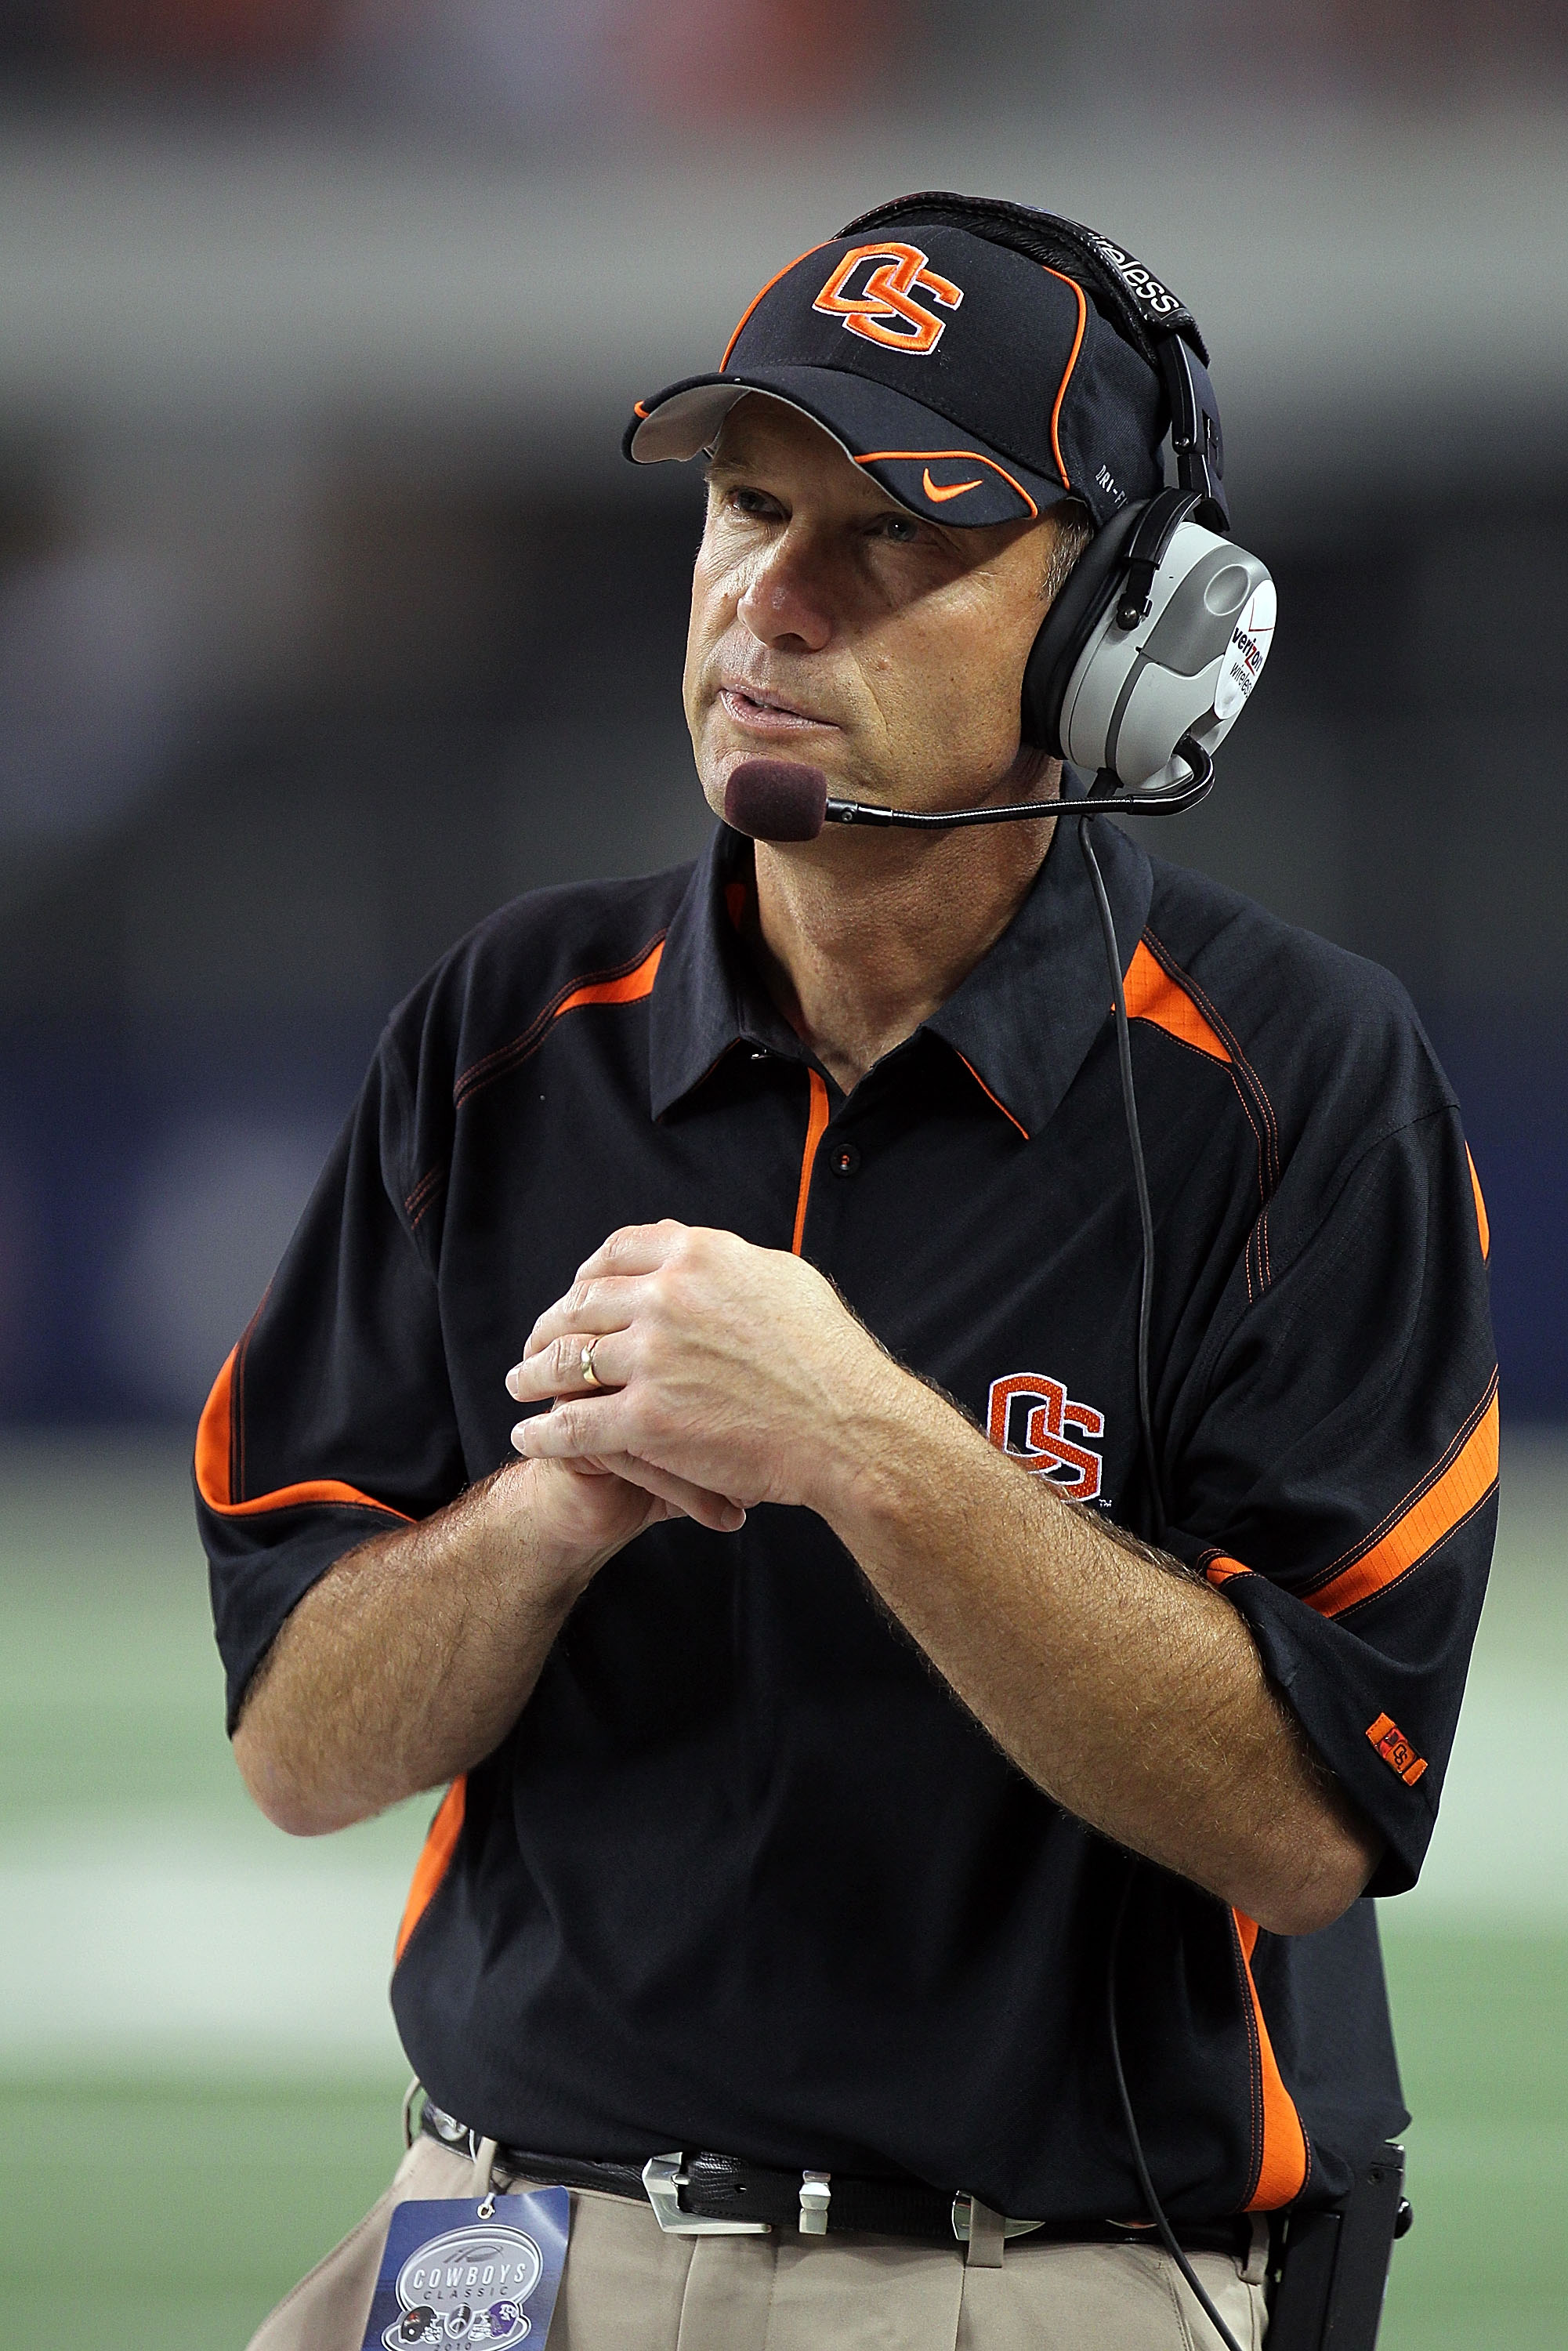 ARLINGTON, TX - SEPTEMBER 04:  Head coach Mike Riley of the Oregon State Beavers on the sidelines during play against the TCU Horned Frogs at Cowboys Stadium on September 4, 2010 in Arlington, Texas.  (Photo by Ronald Martinez/Getty Images)